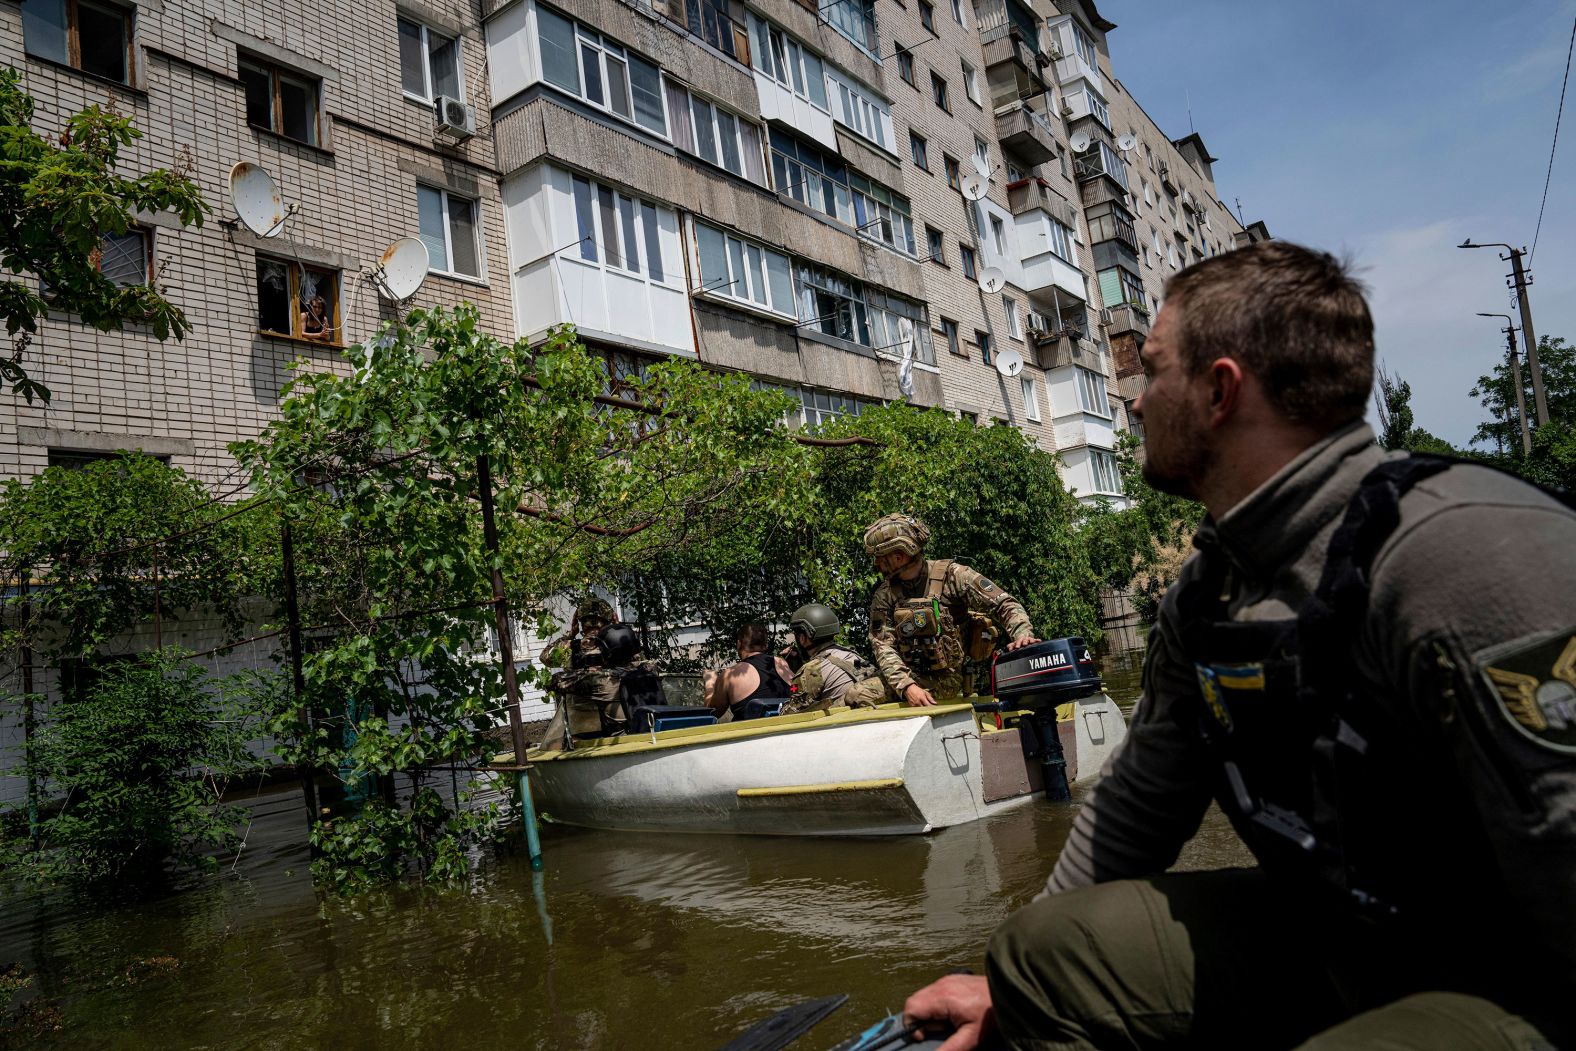 Ukrainian servicemen use boats to evacuate people in a flooded neighborhood of Kherson on June 8.